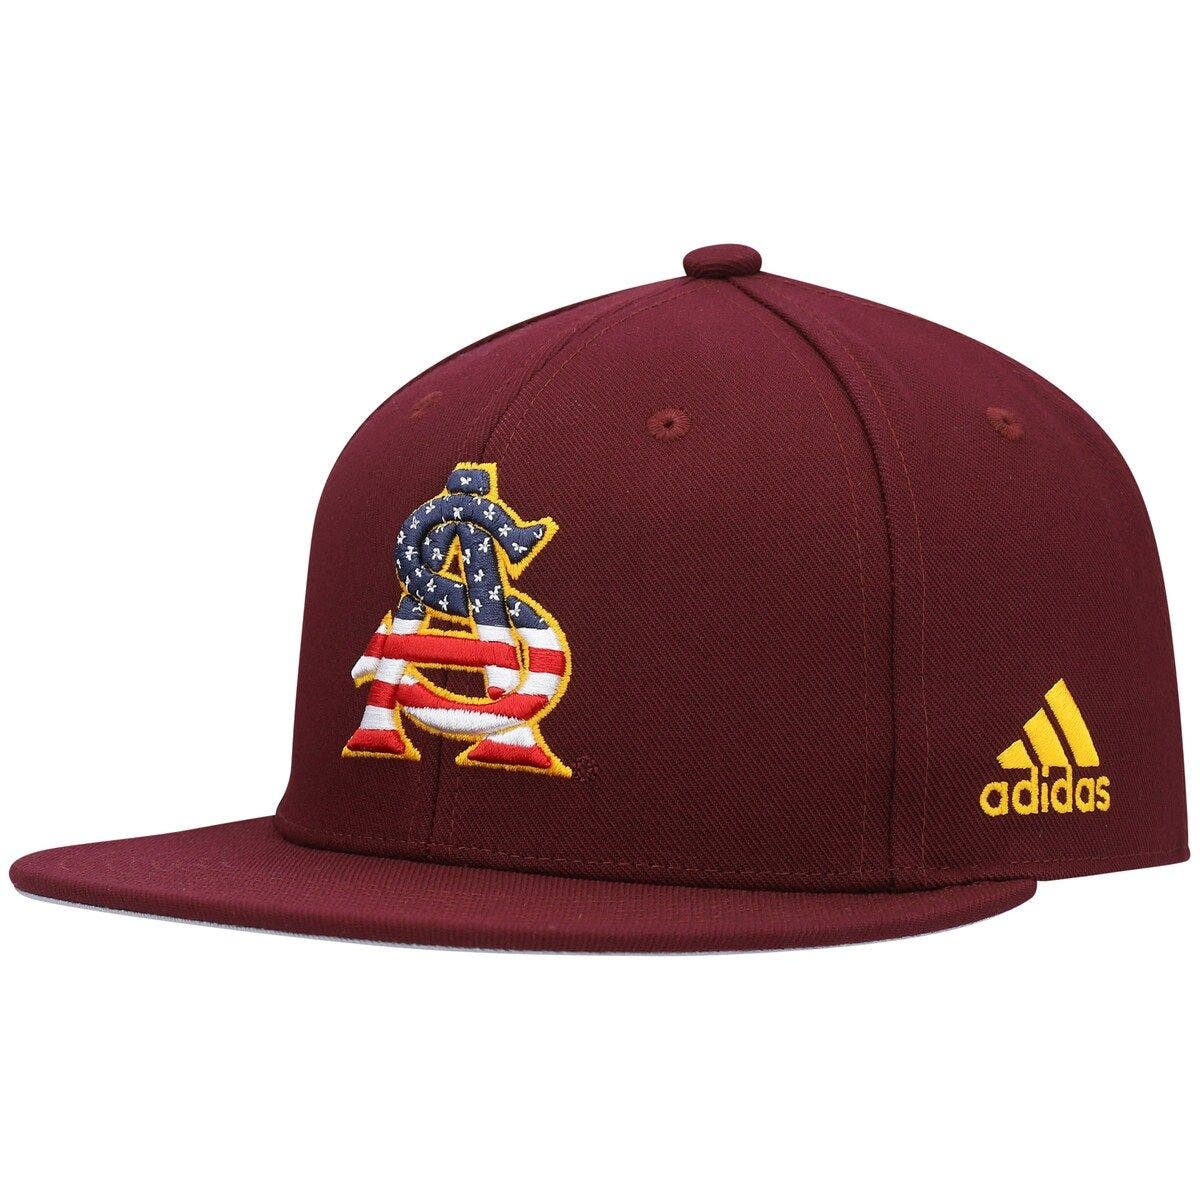 NCAA Arizona State Sun Devils Mens Adjustable Hat Relaxed Fit Team Icon Maroon 